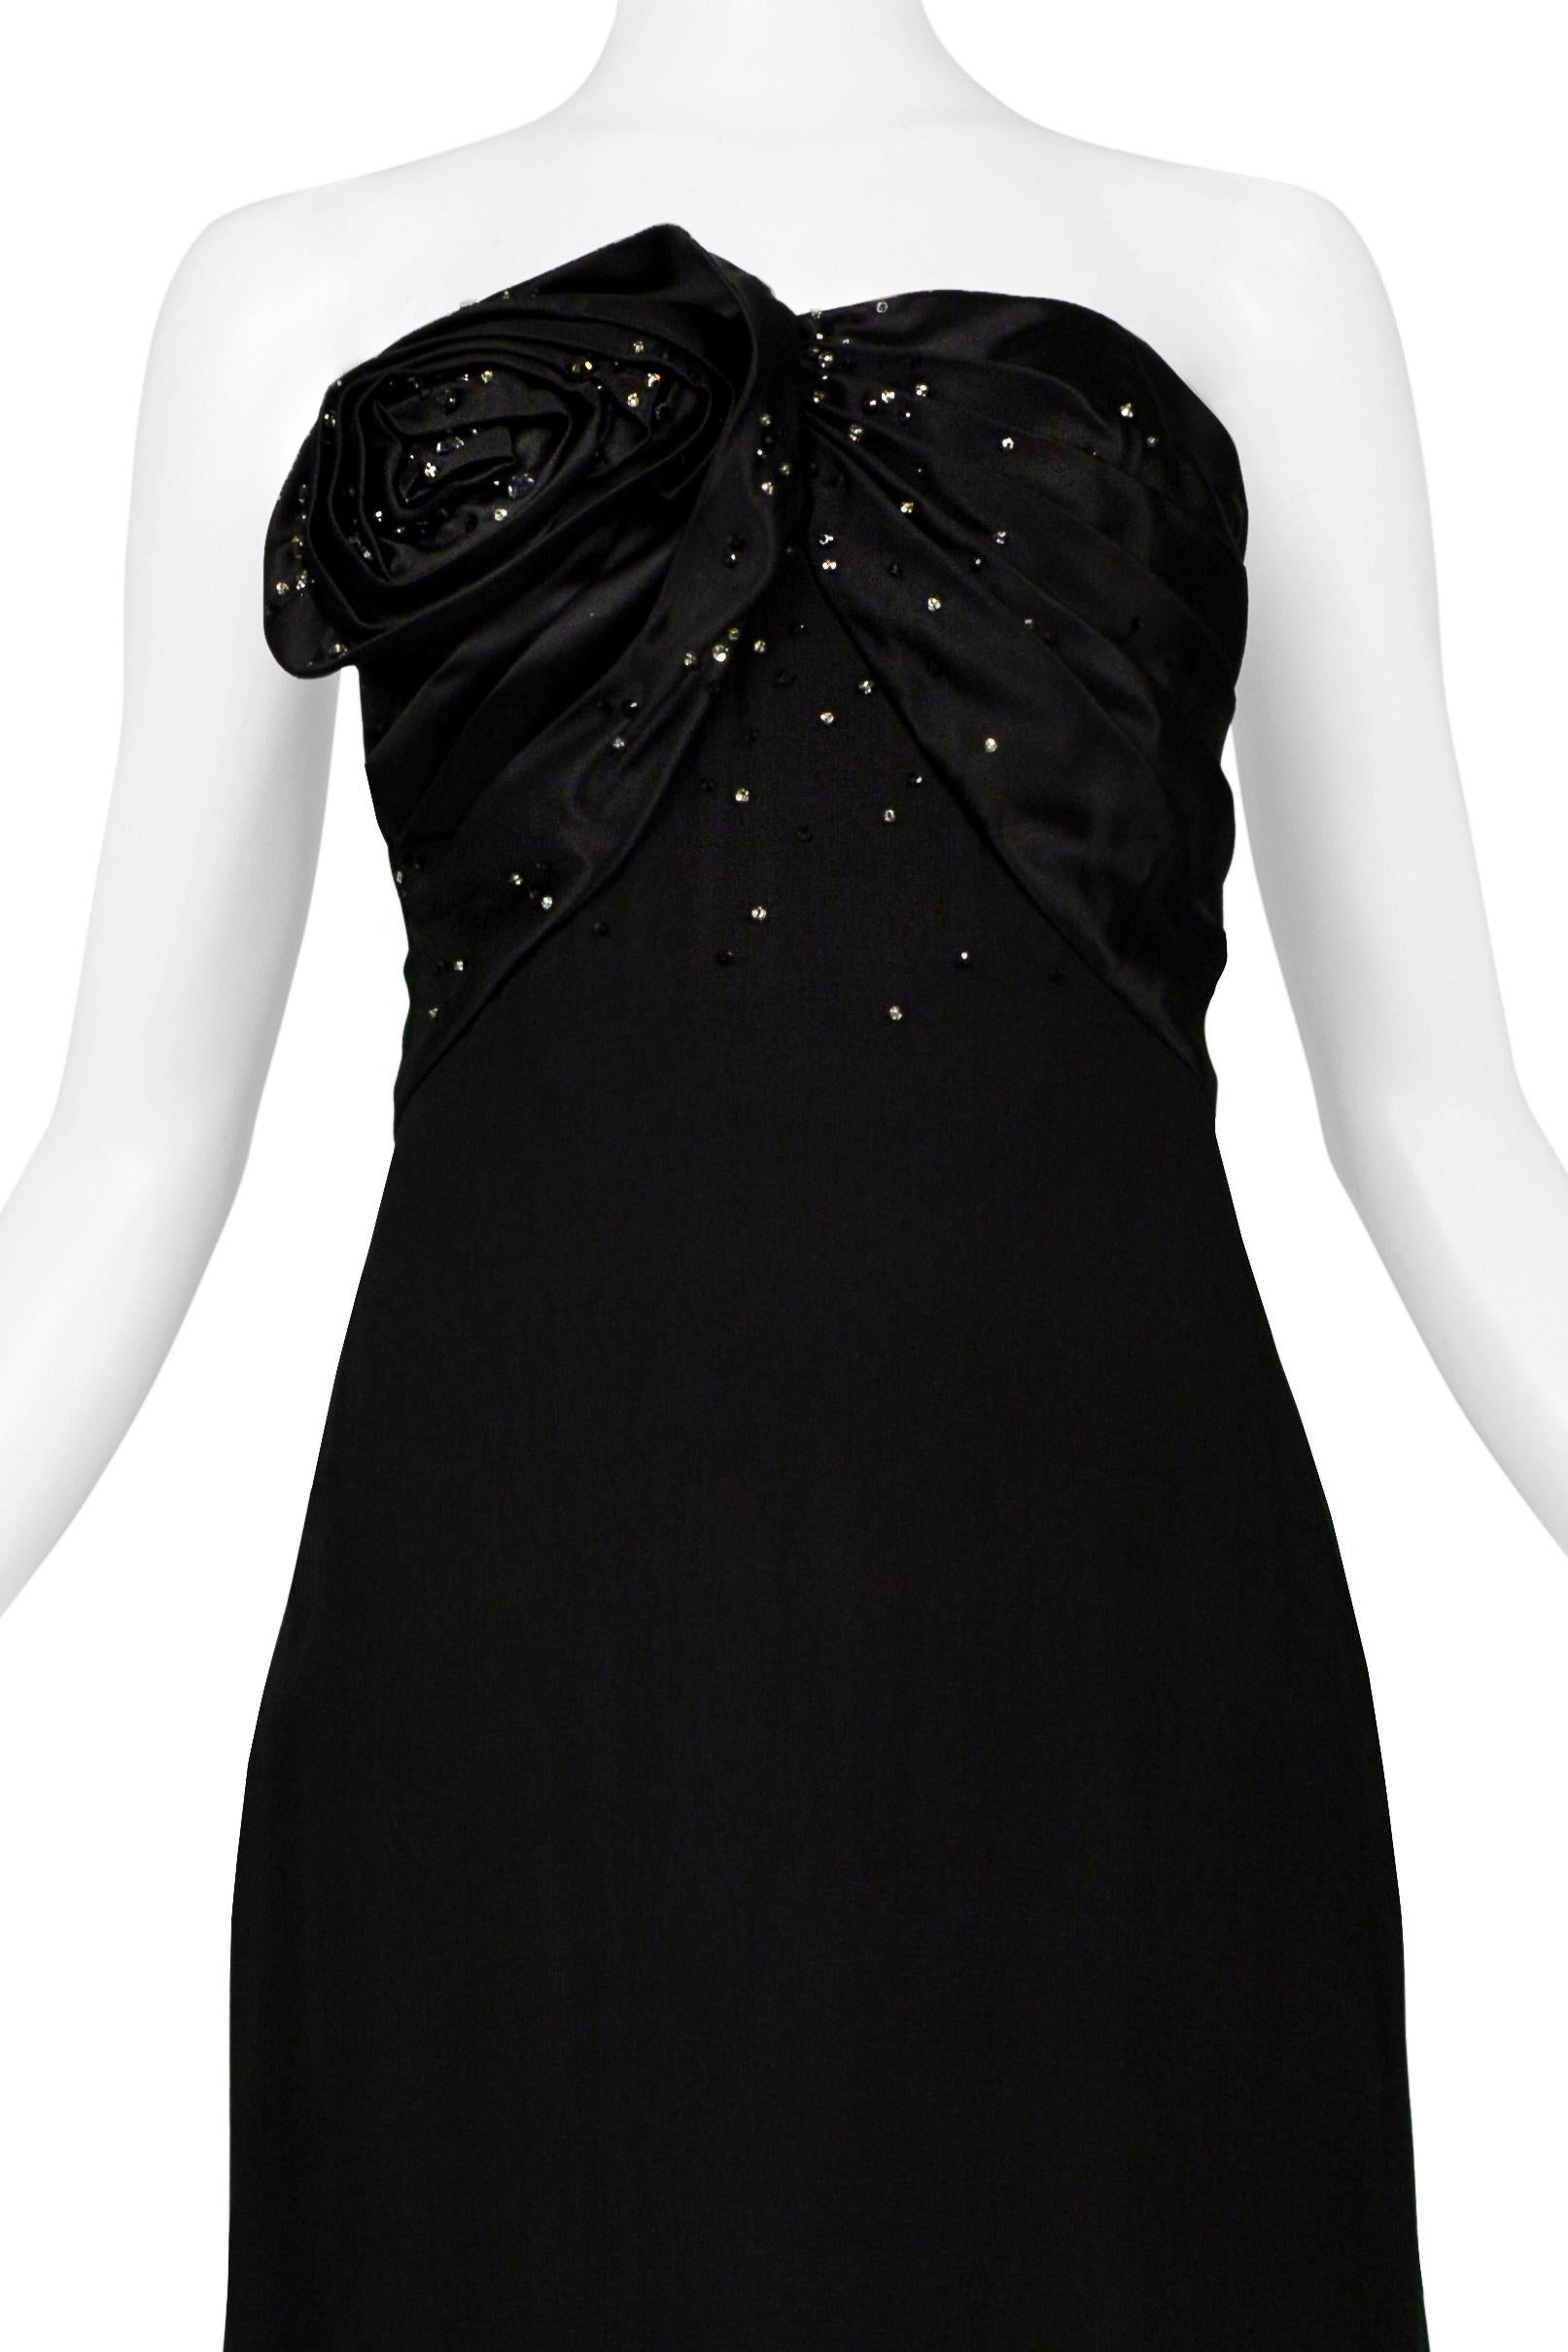 Christian Dior By John Galliano Black Gown W/ Rosettes & Rhinestones 2008 Resort In Excellent Condition For Sale In Los Angeles, CA